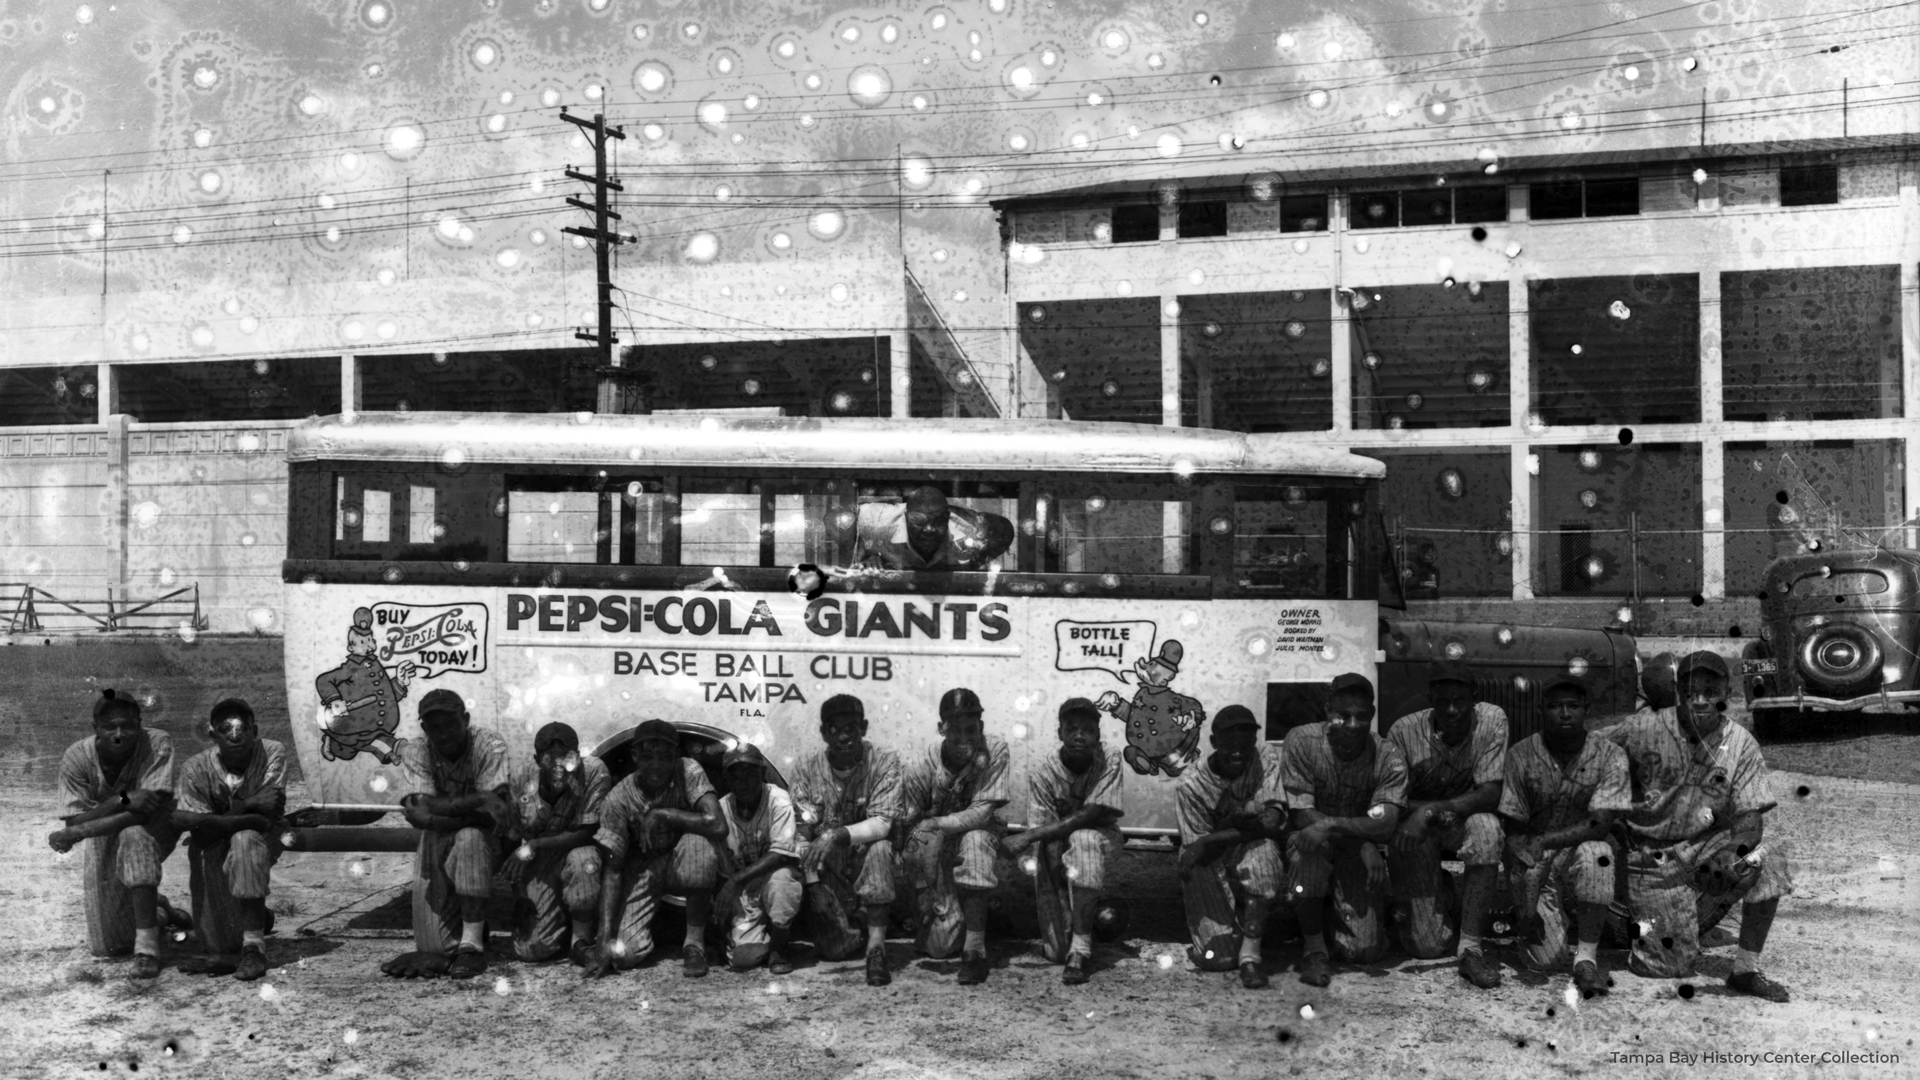 The Pepsi Cola Giants were a "Negro League" team that played in Florida and Cuba in the 1920s and beyond. This photograph of the Giants in front of their bus was taken in 1940. [Tampa Bay History Center Collection]